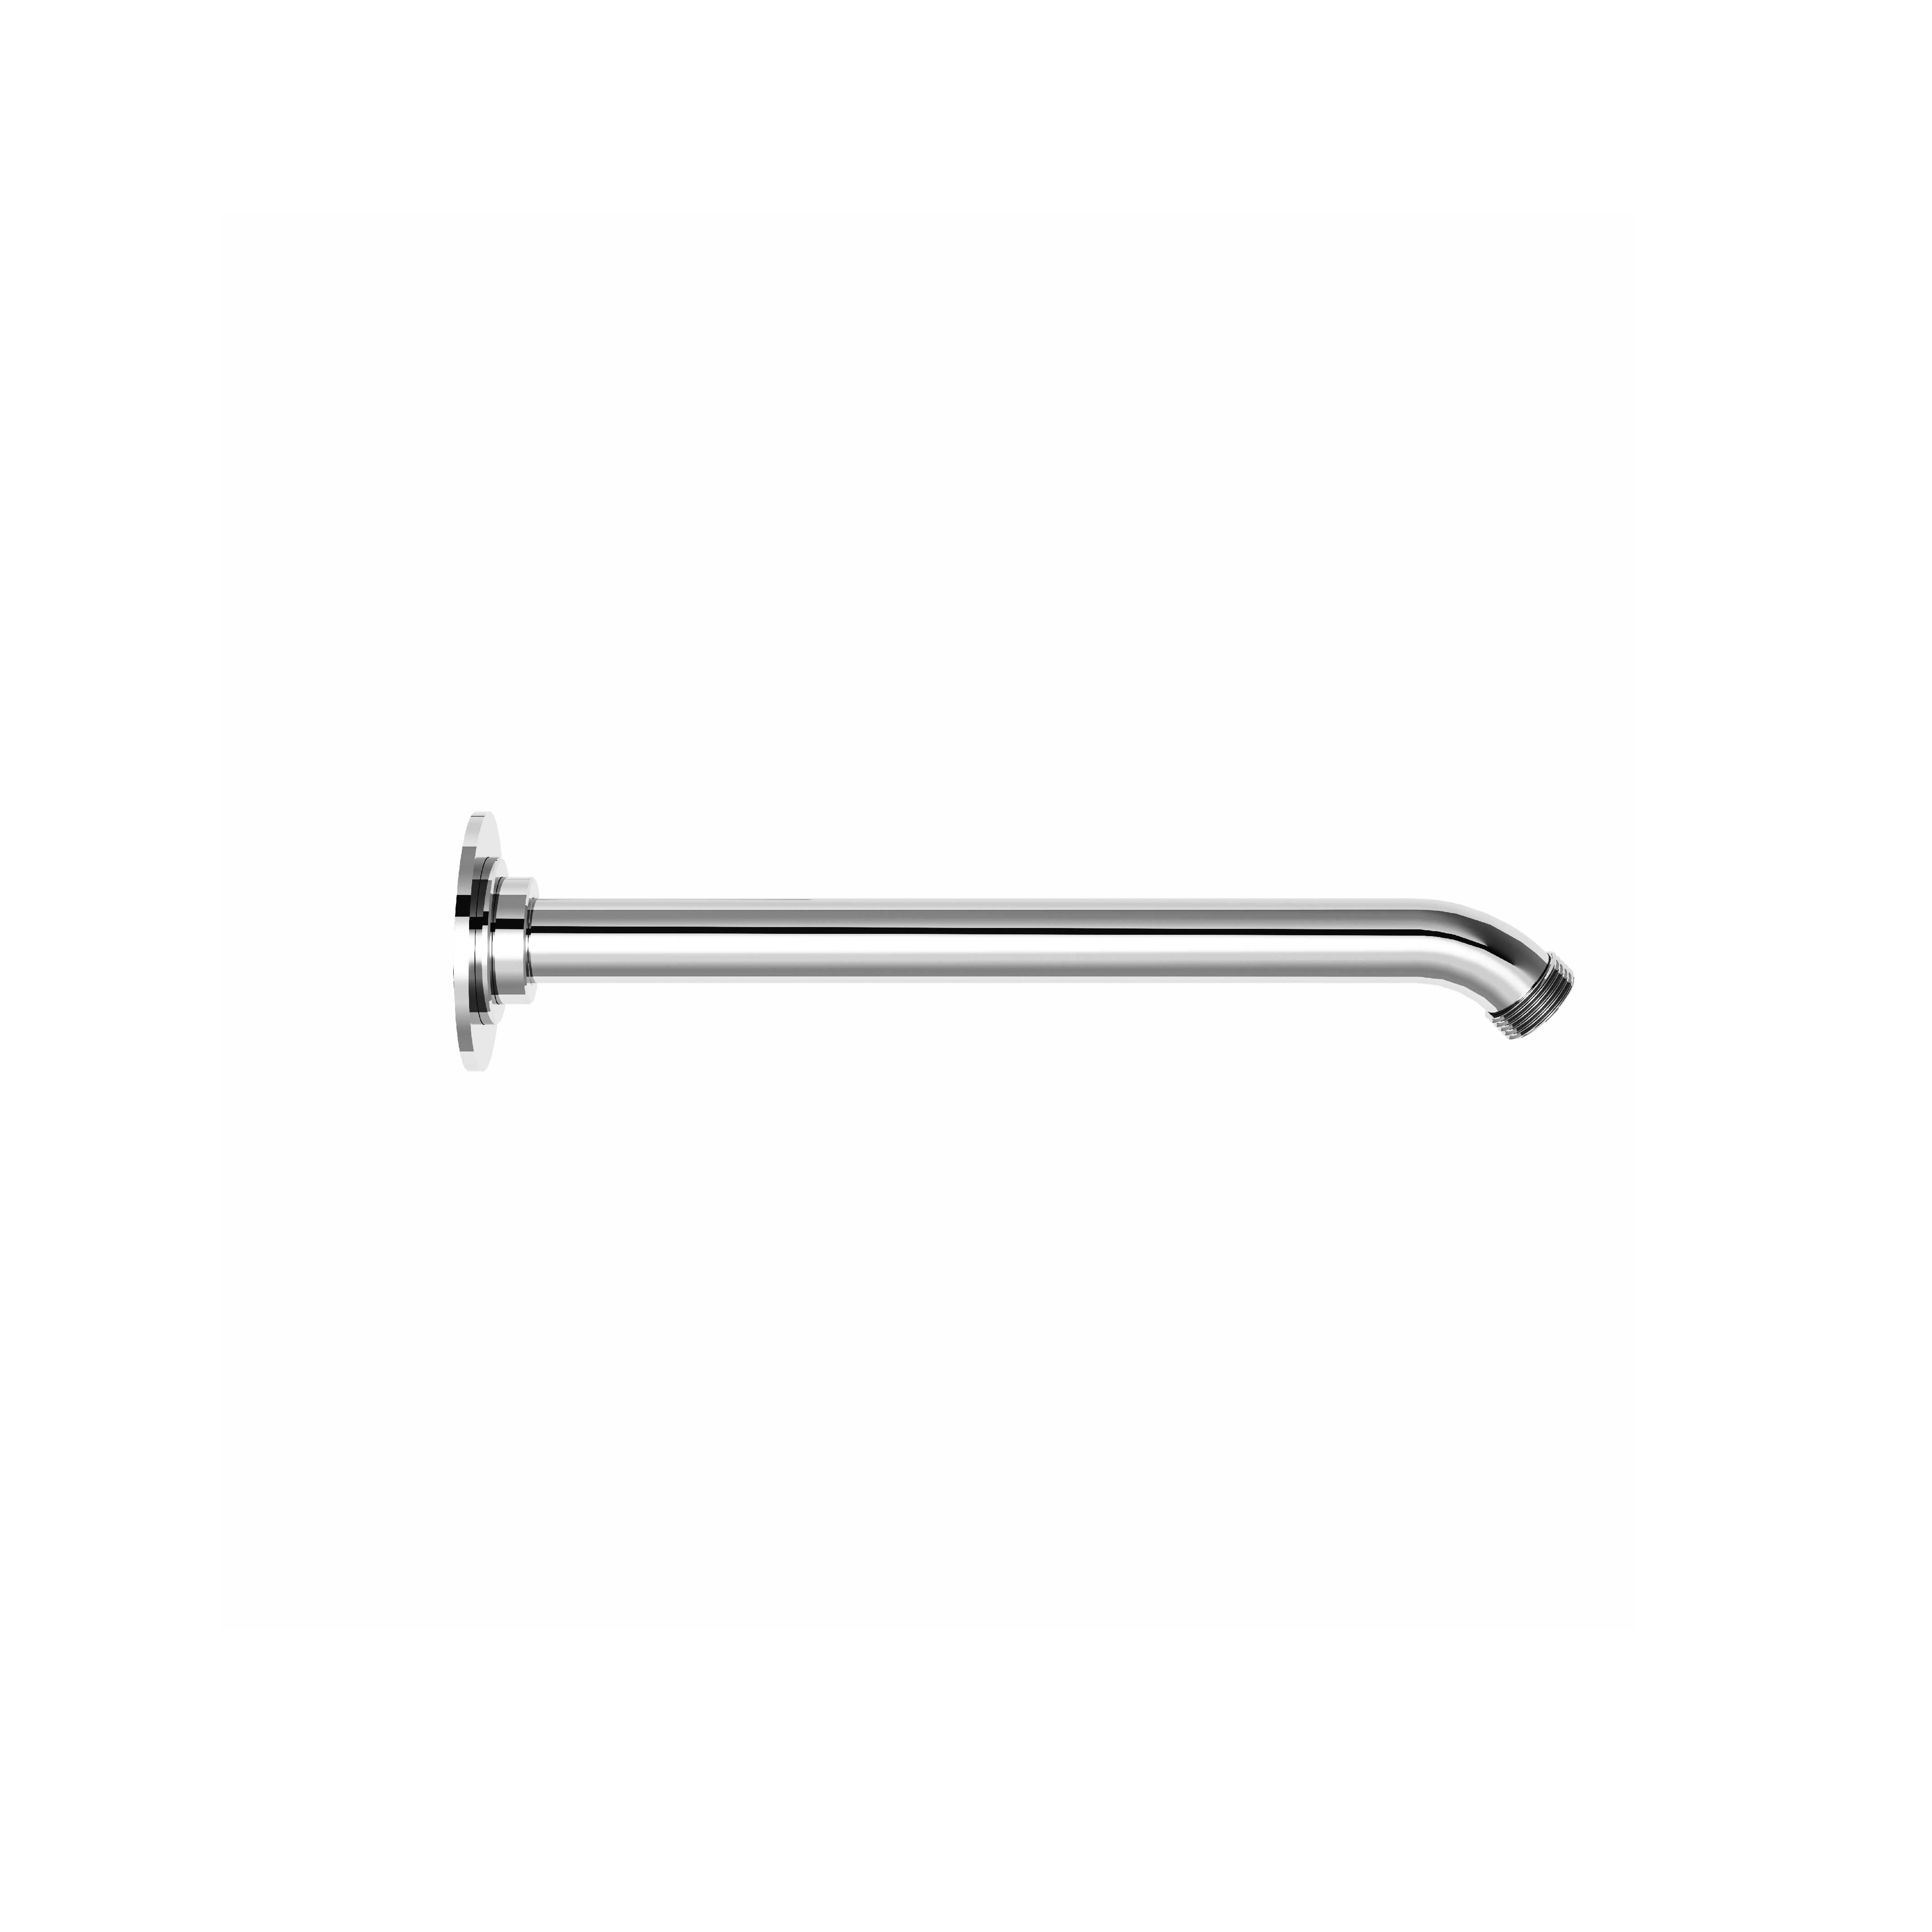 M38-2W170 Wall mounted shower arm 170mm